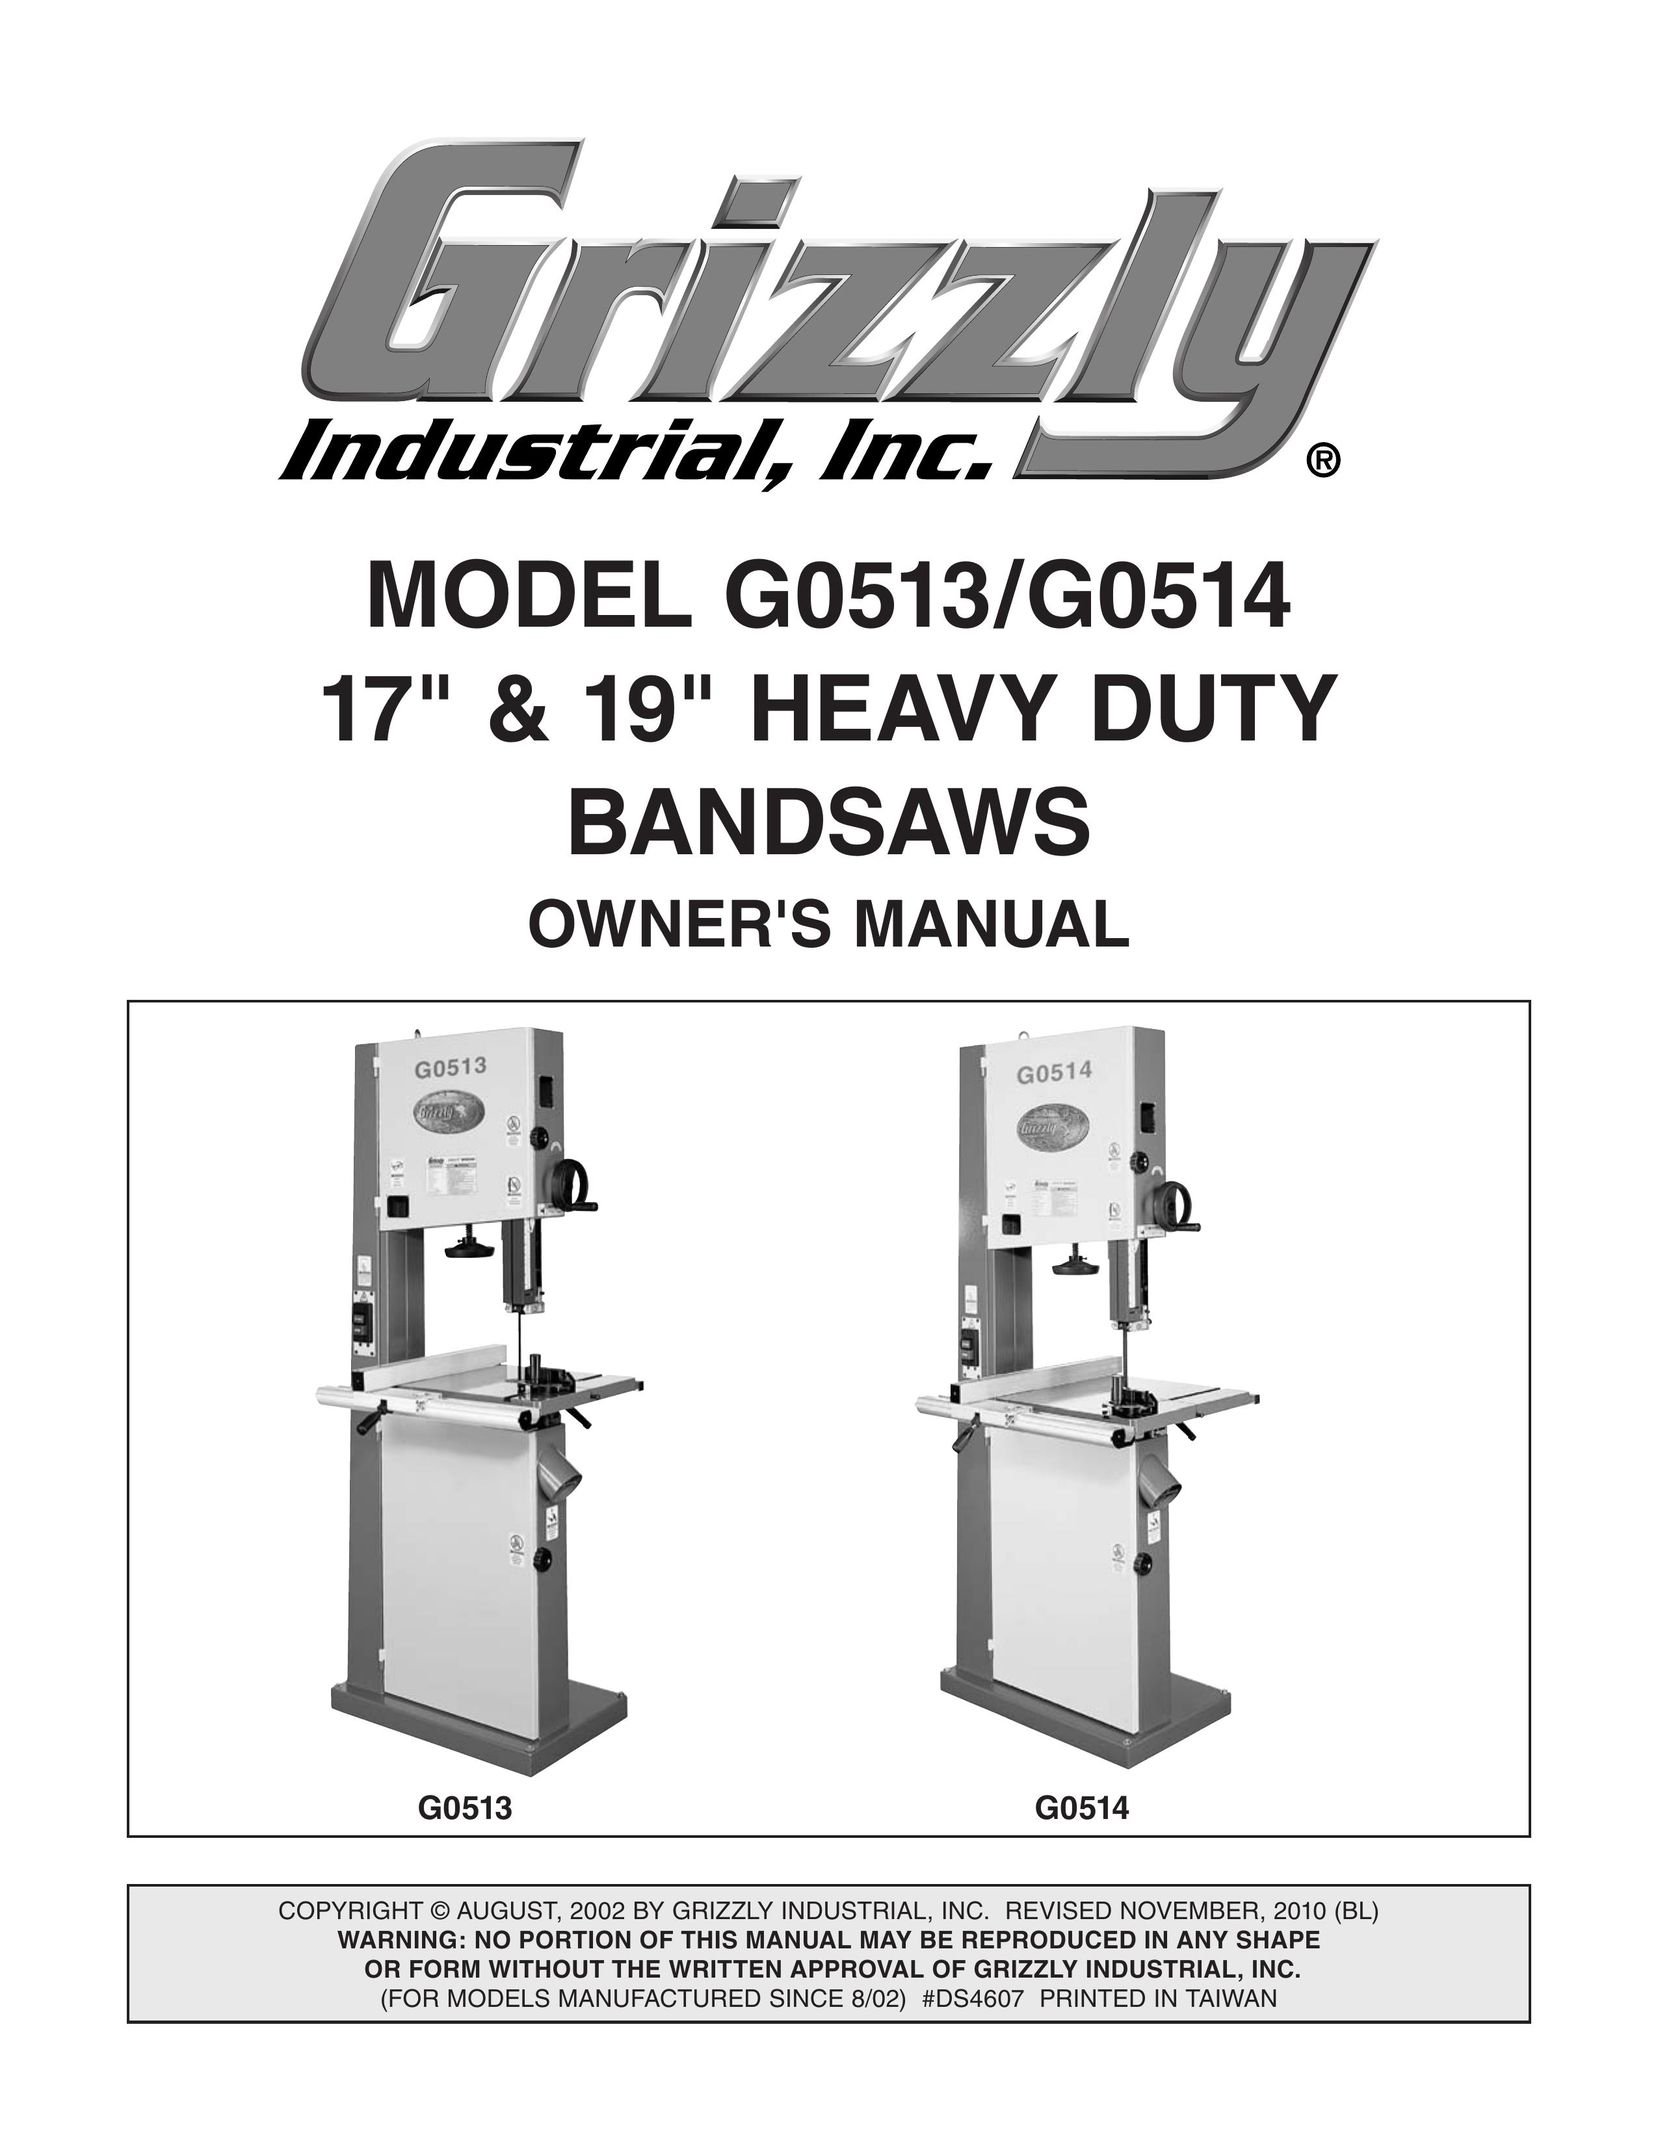 Grizzly G0514 Saw User Manual